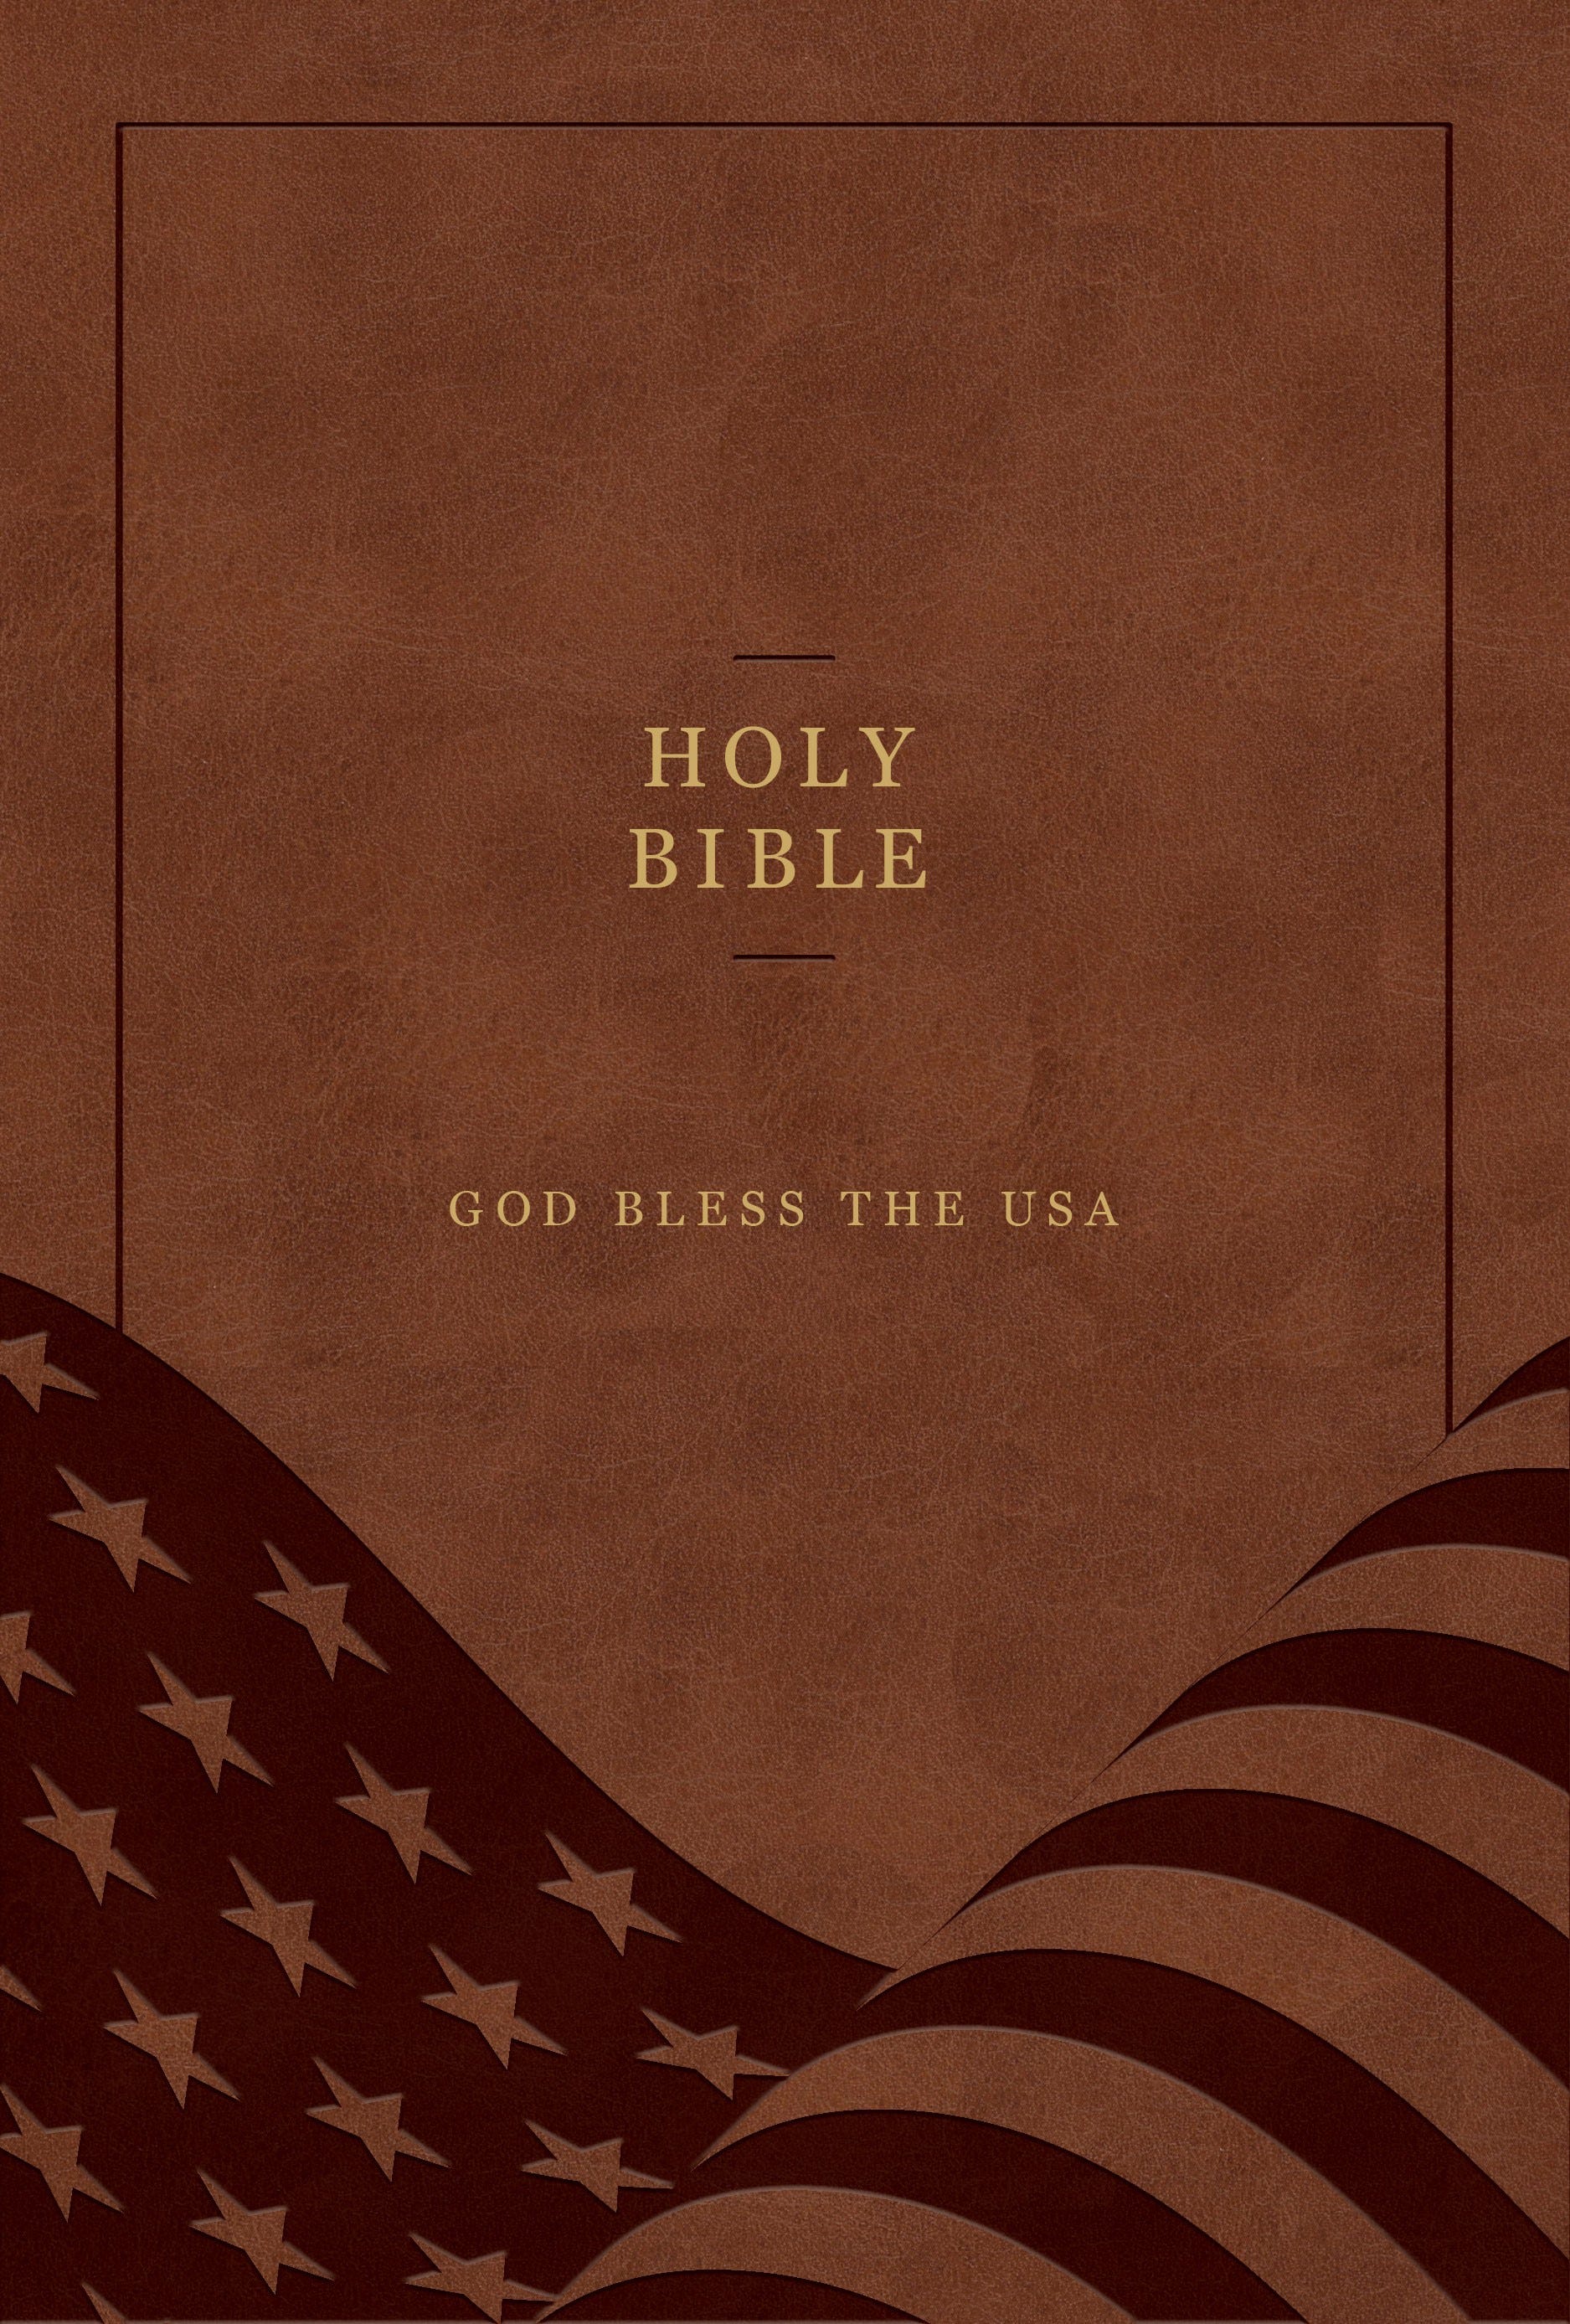 Lee Greenwood's 'God Bless the USA Bible' finding new publisher